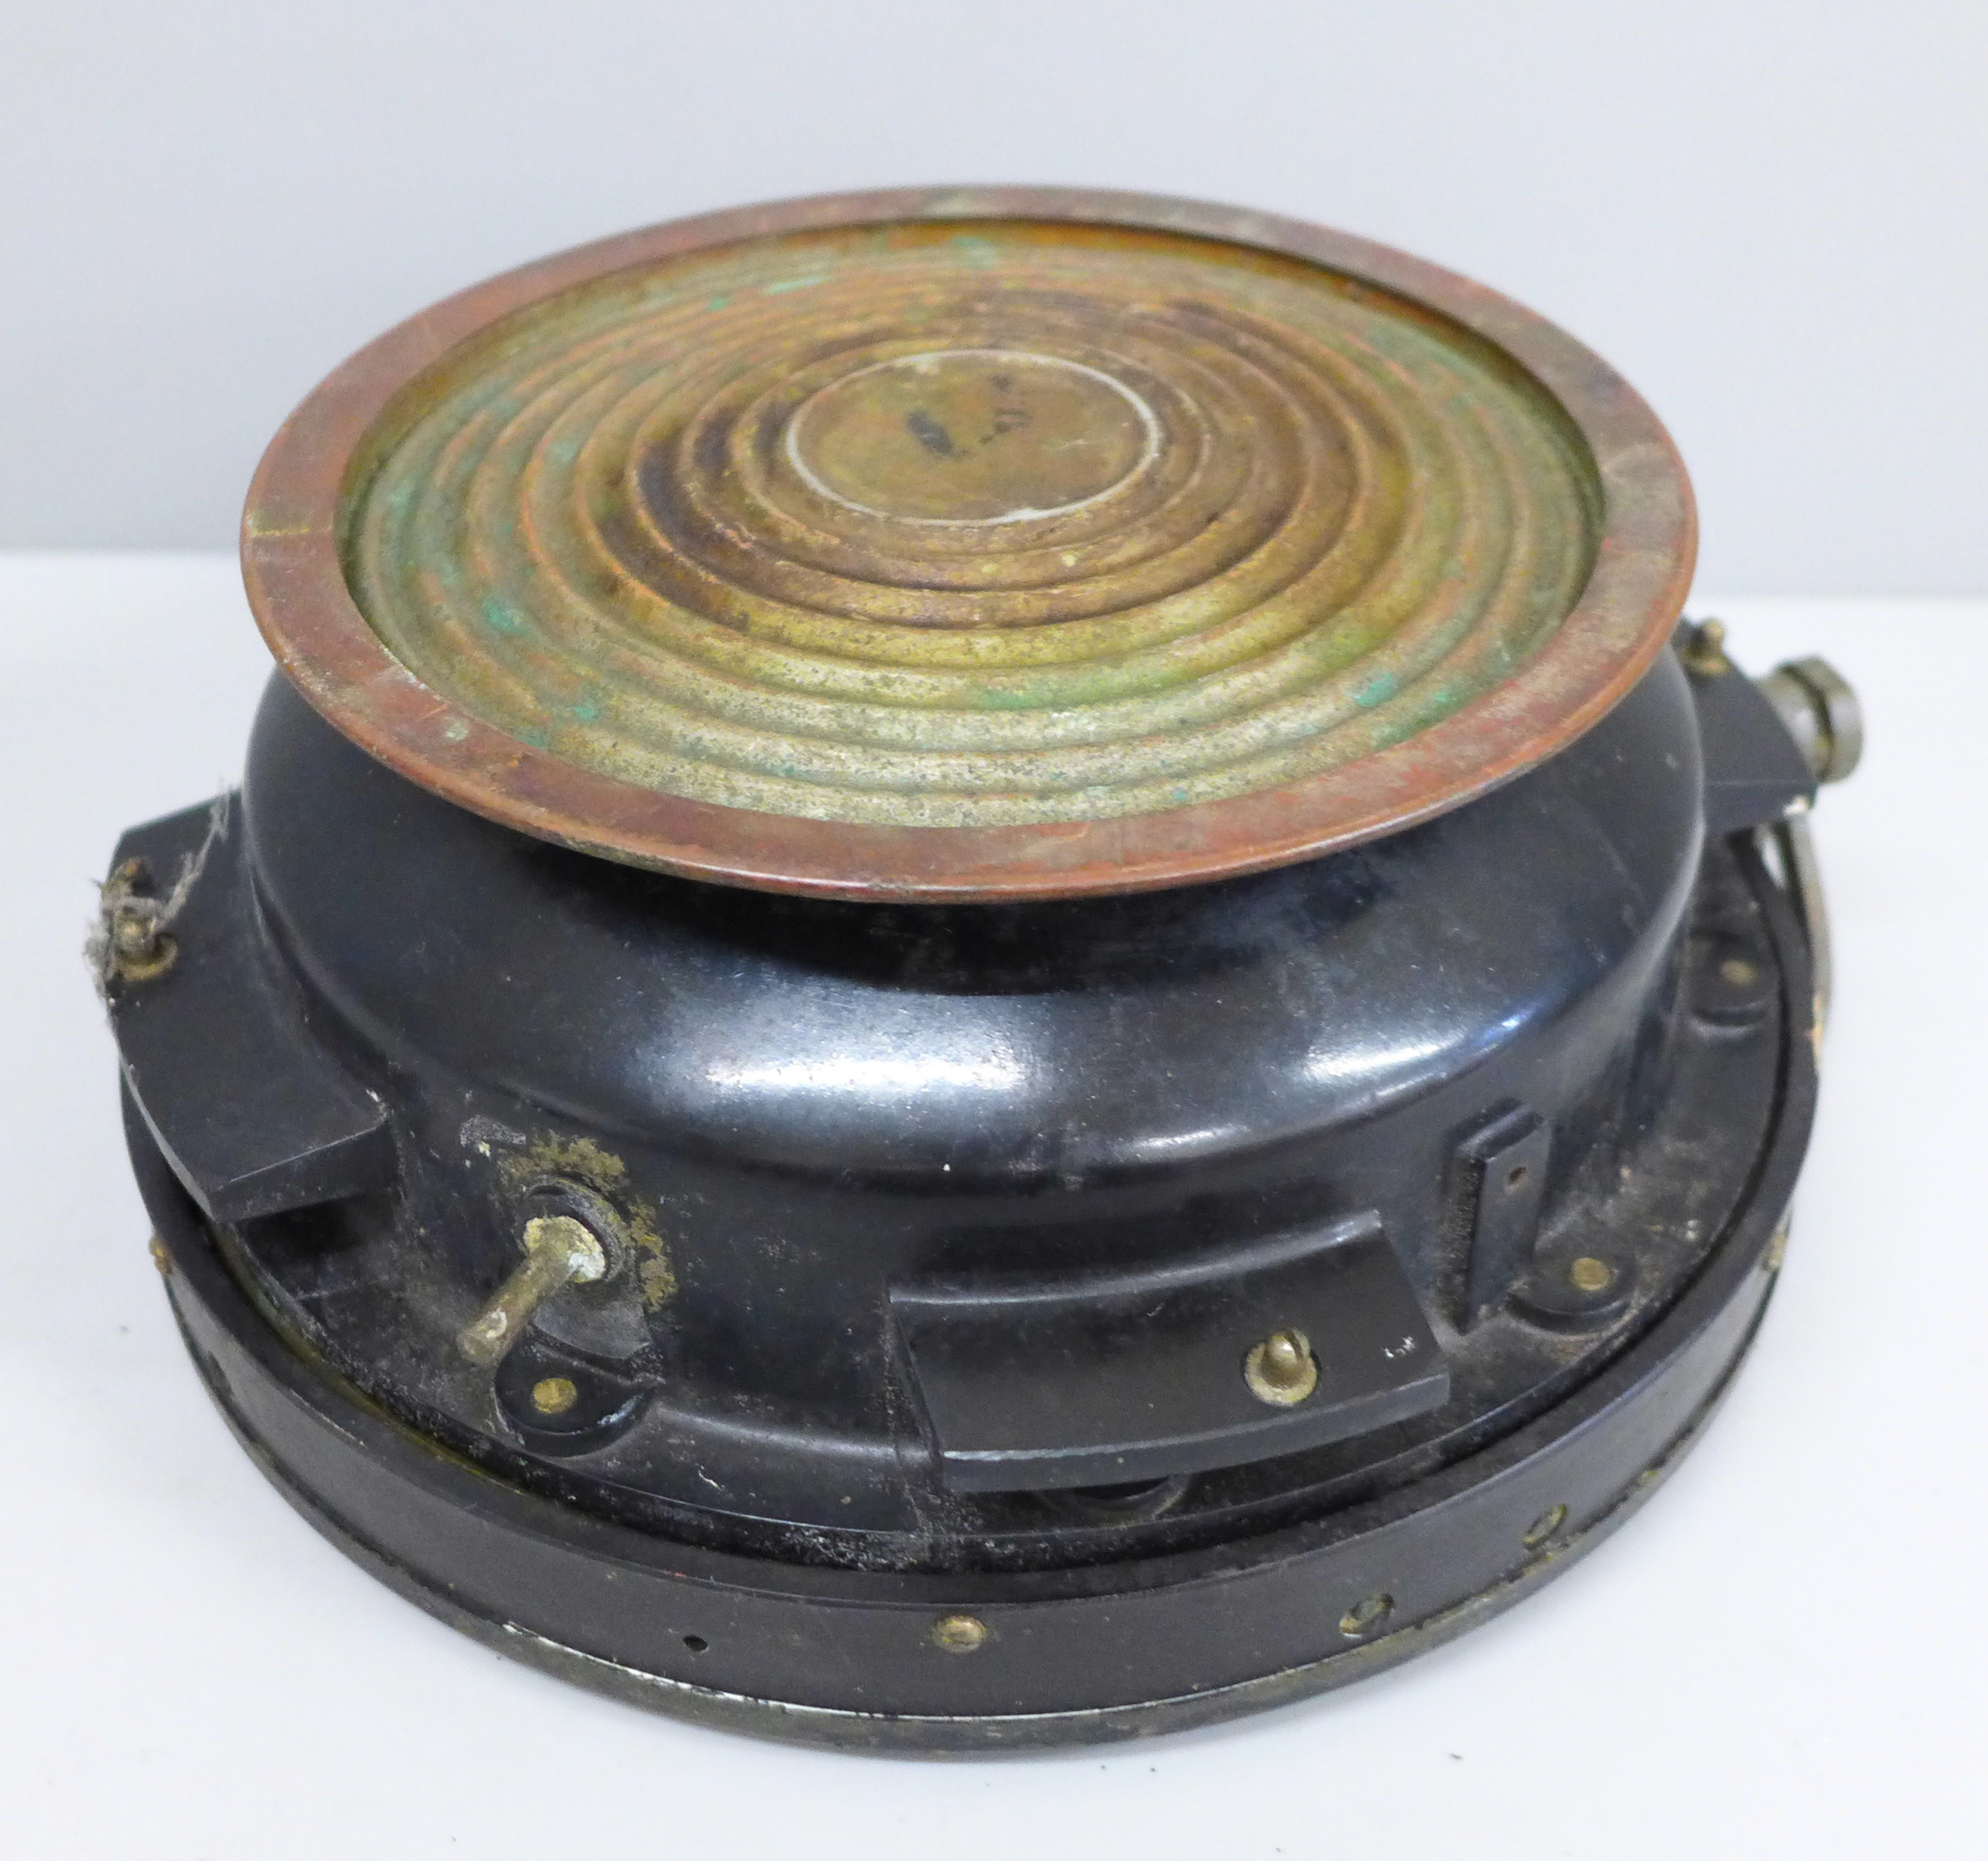 A Type P4A aeronautical compass as used in Spitfire and Lancaster Bomber aircraft - Image 2 of 2